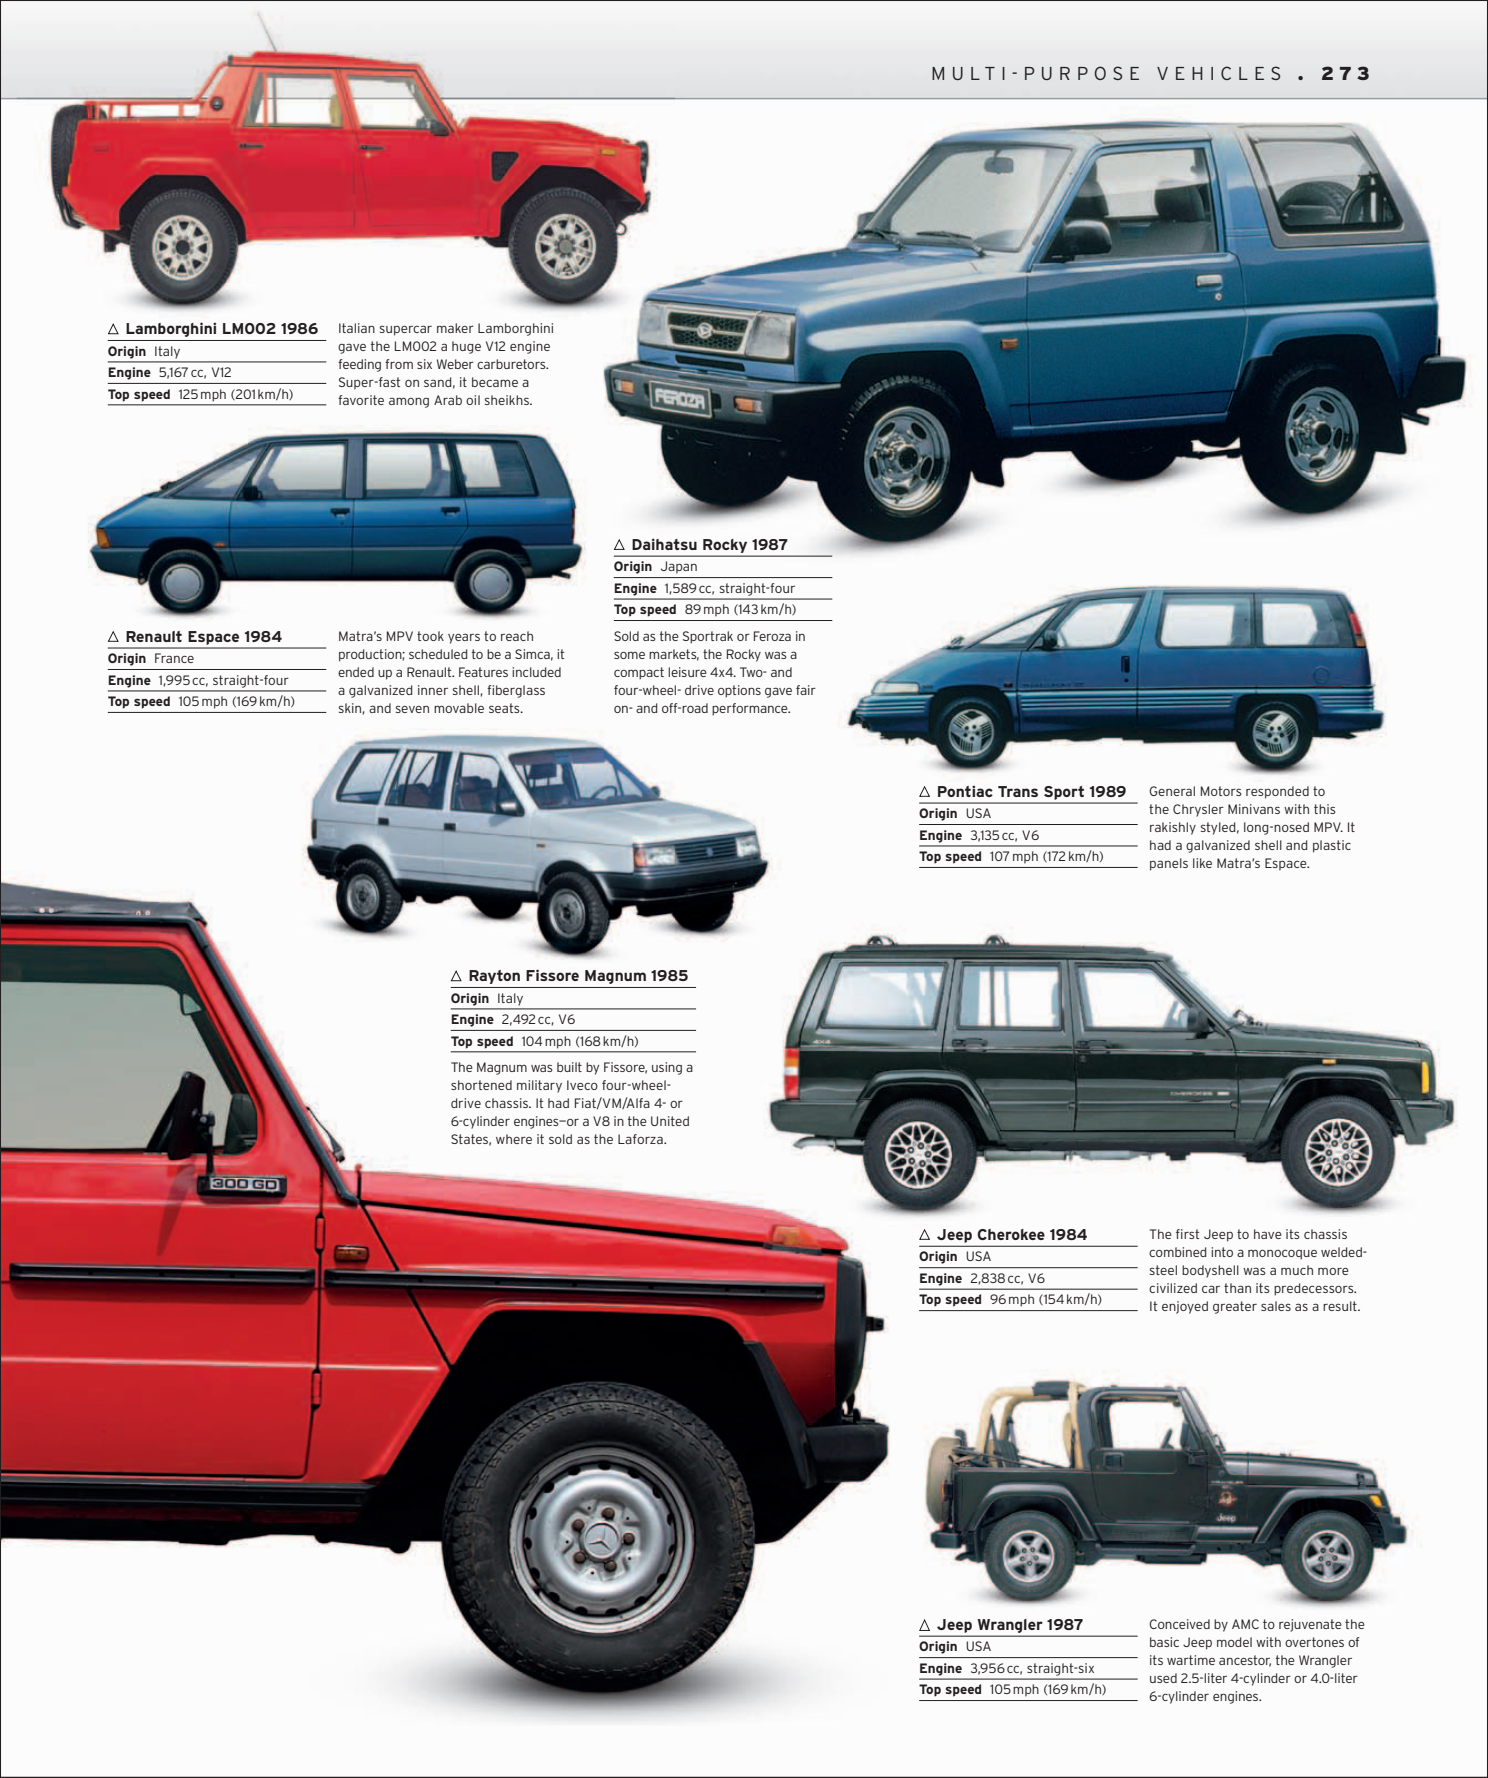 Car%20-%20The%20Definitive%20Visual%20History%20of%20the%20Automobile_275.png